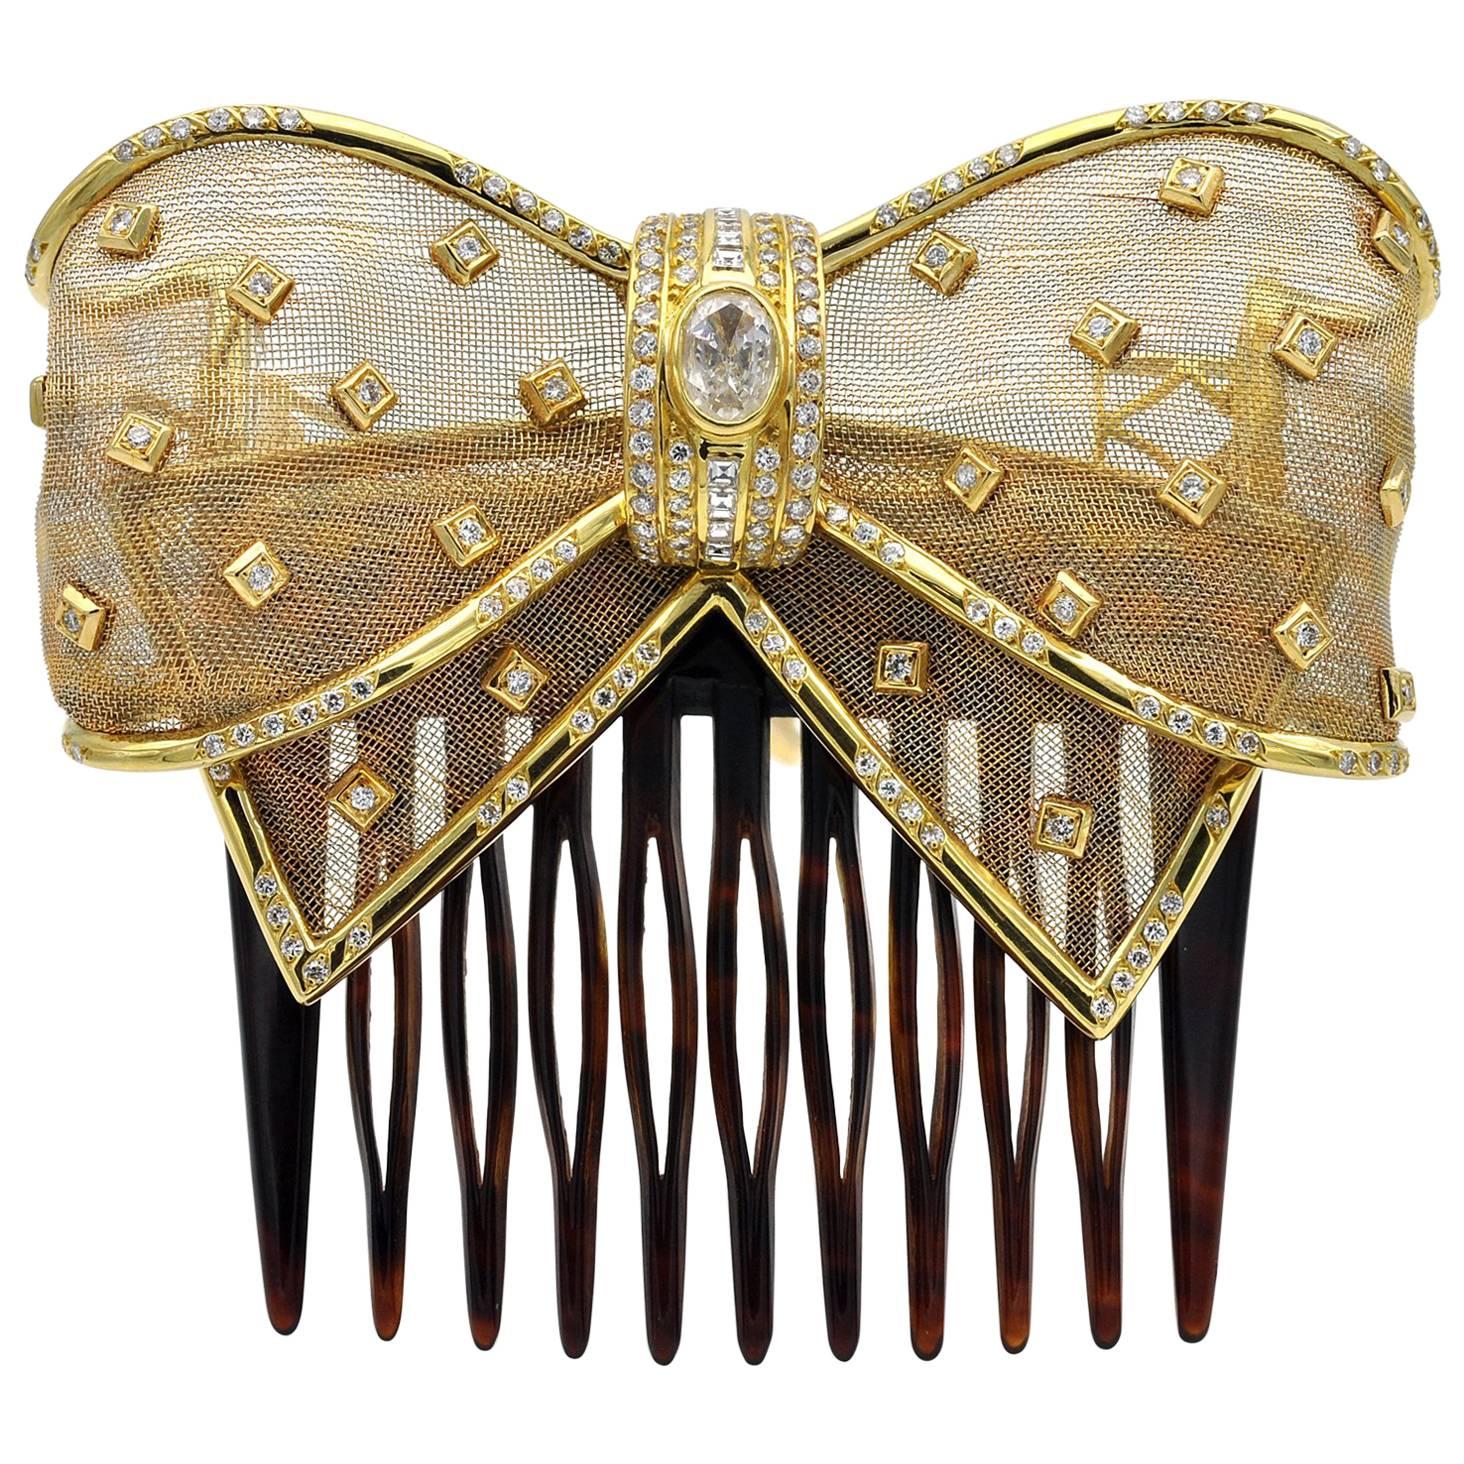 Diamond and Gold Brooch / Comb